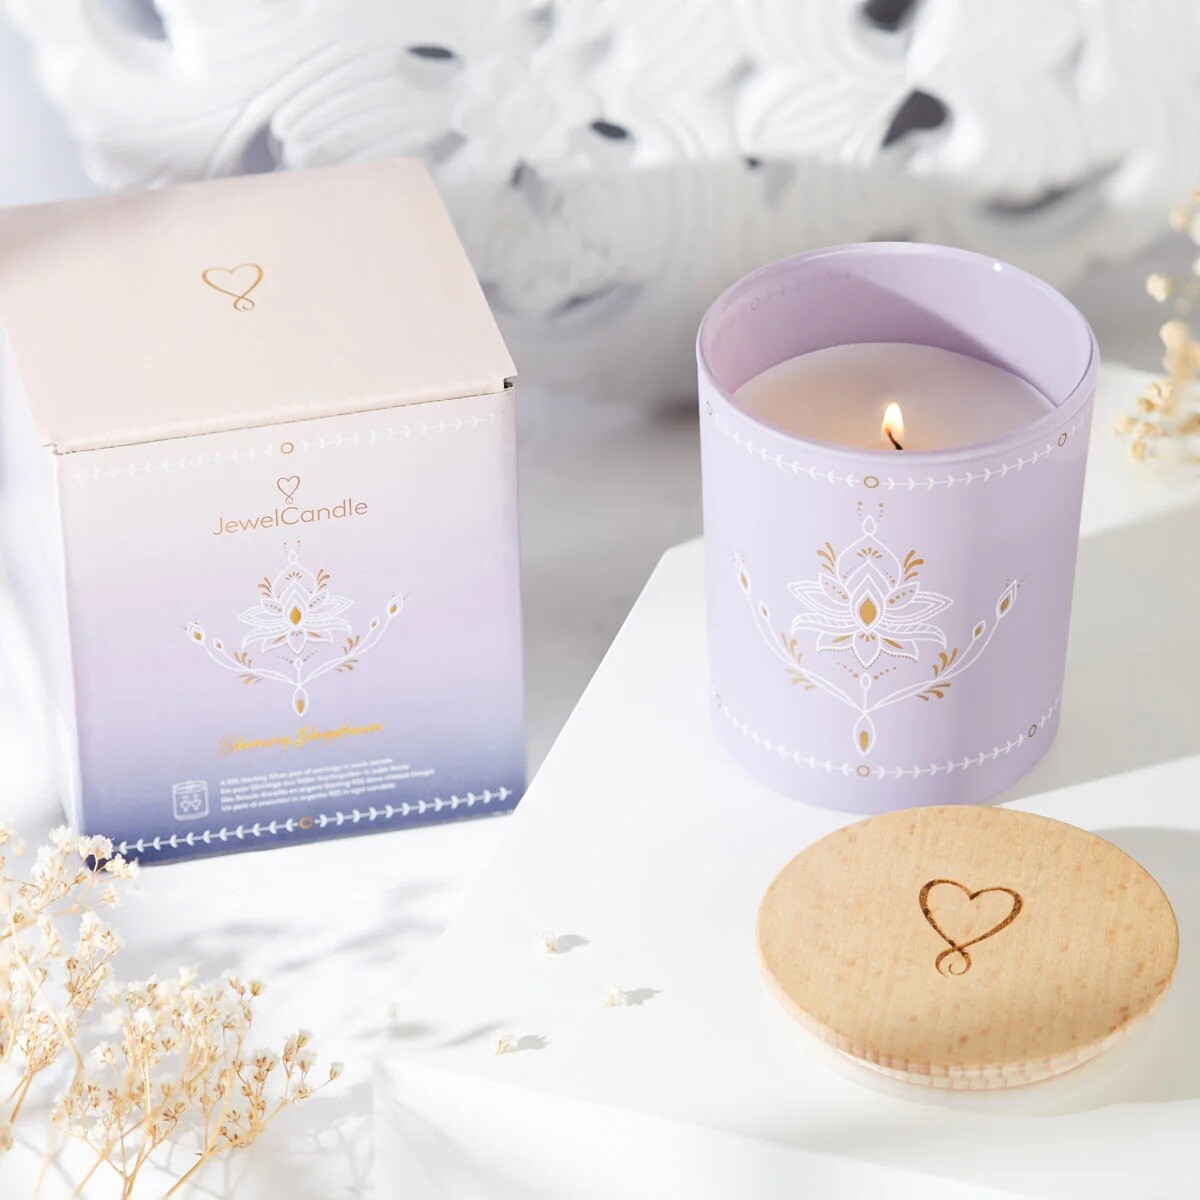 Jewelcandle Blooming Daydream ♥